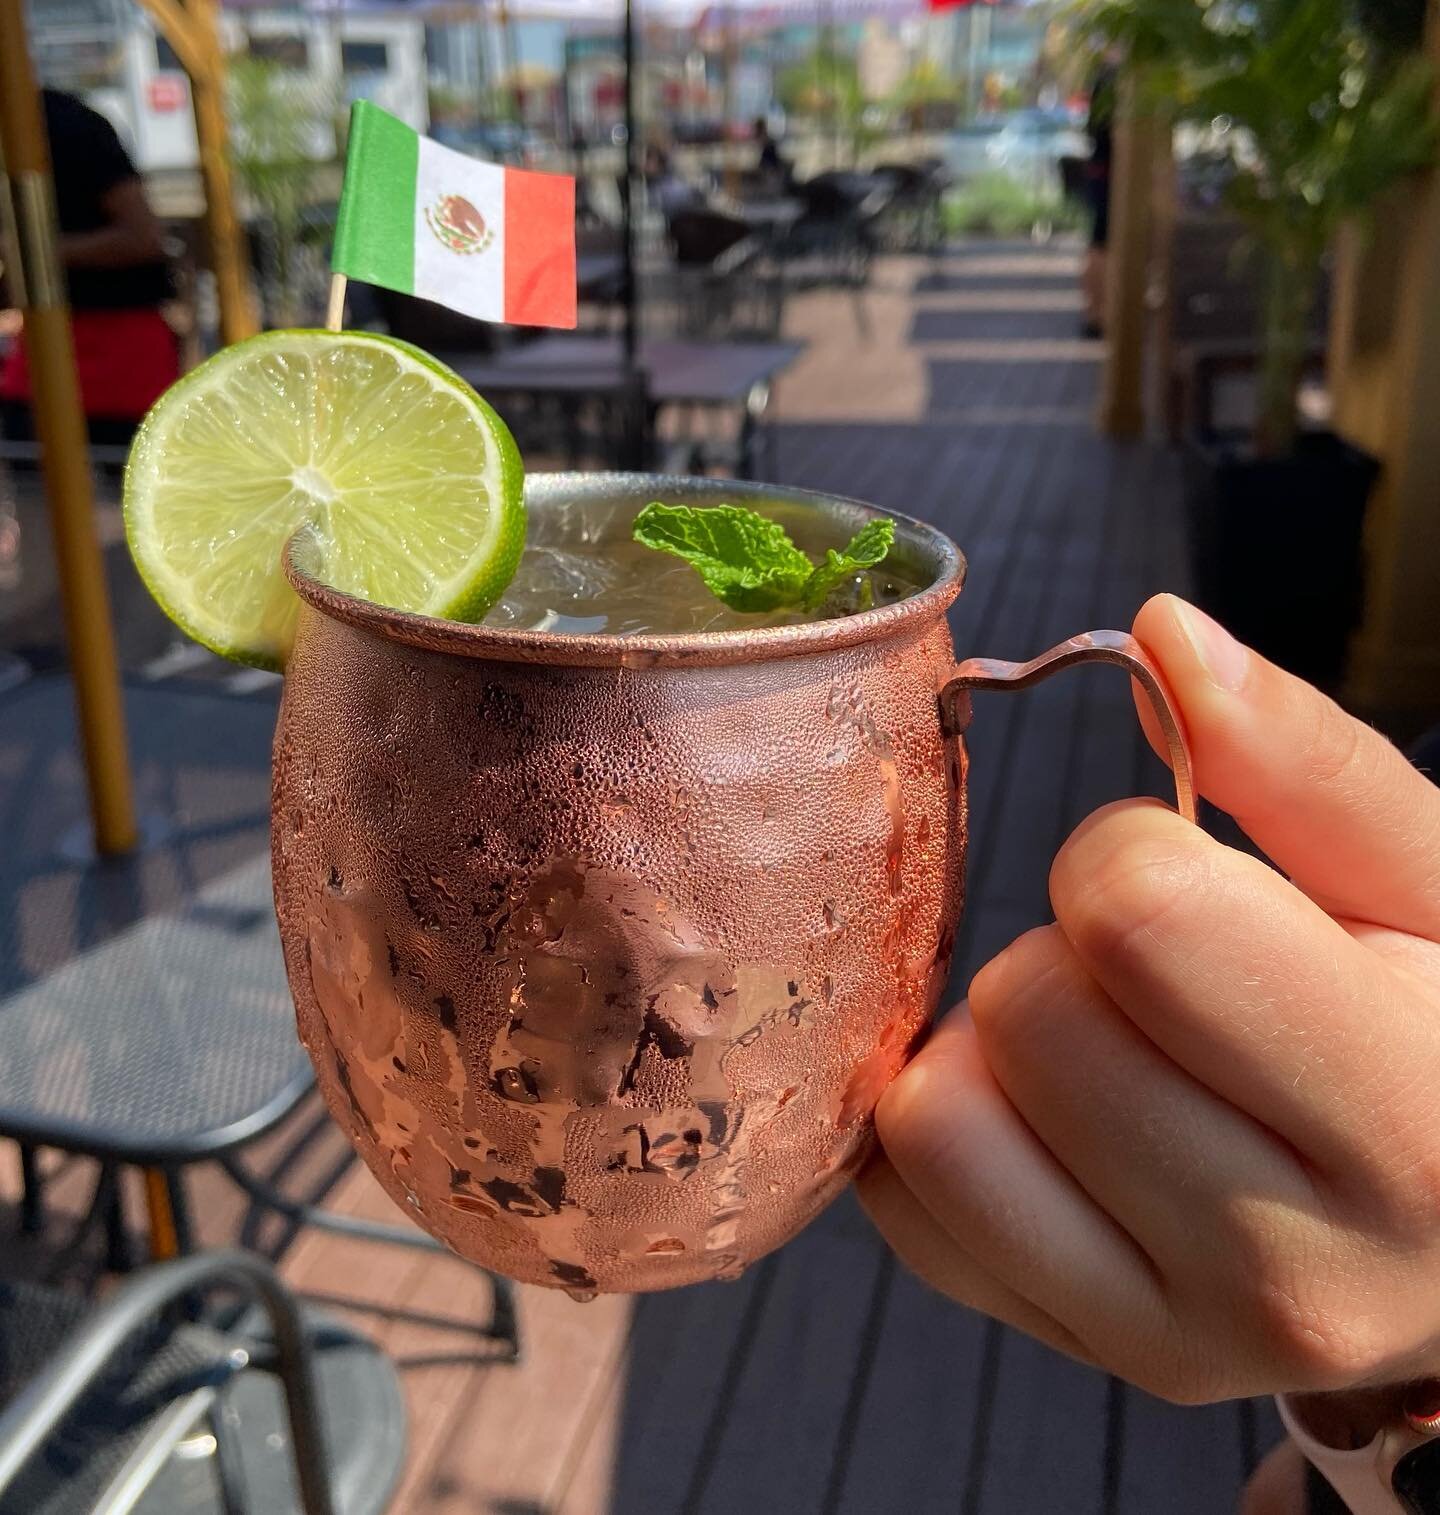 May we interest you in one of our 
🇲🇽 MEXICAN MULES !? 🇲🇽
😋🤗
#mexicanmule #tequila #lime #orange #gingerbeer 
.
#instagood #mules #mexicandrinks #tequila #tacos #mexicanfood #niagarafoodies #niagarafalls #summerdrinks #summercocktails #josecuer